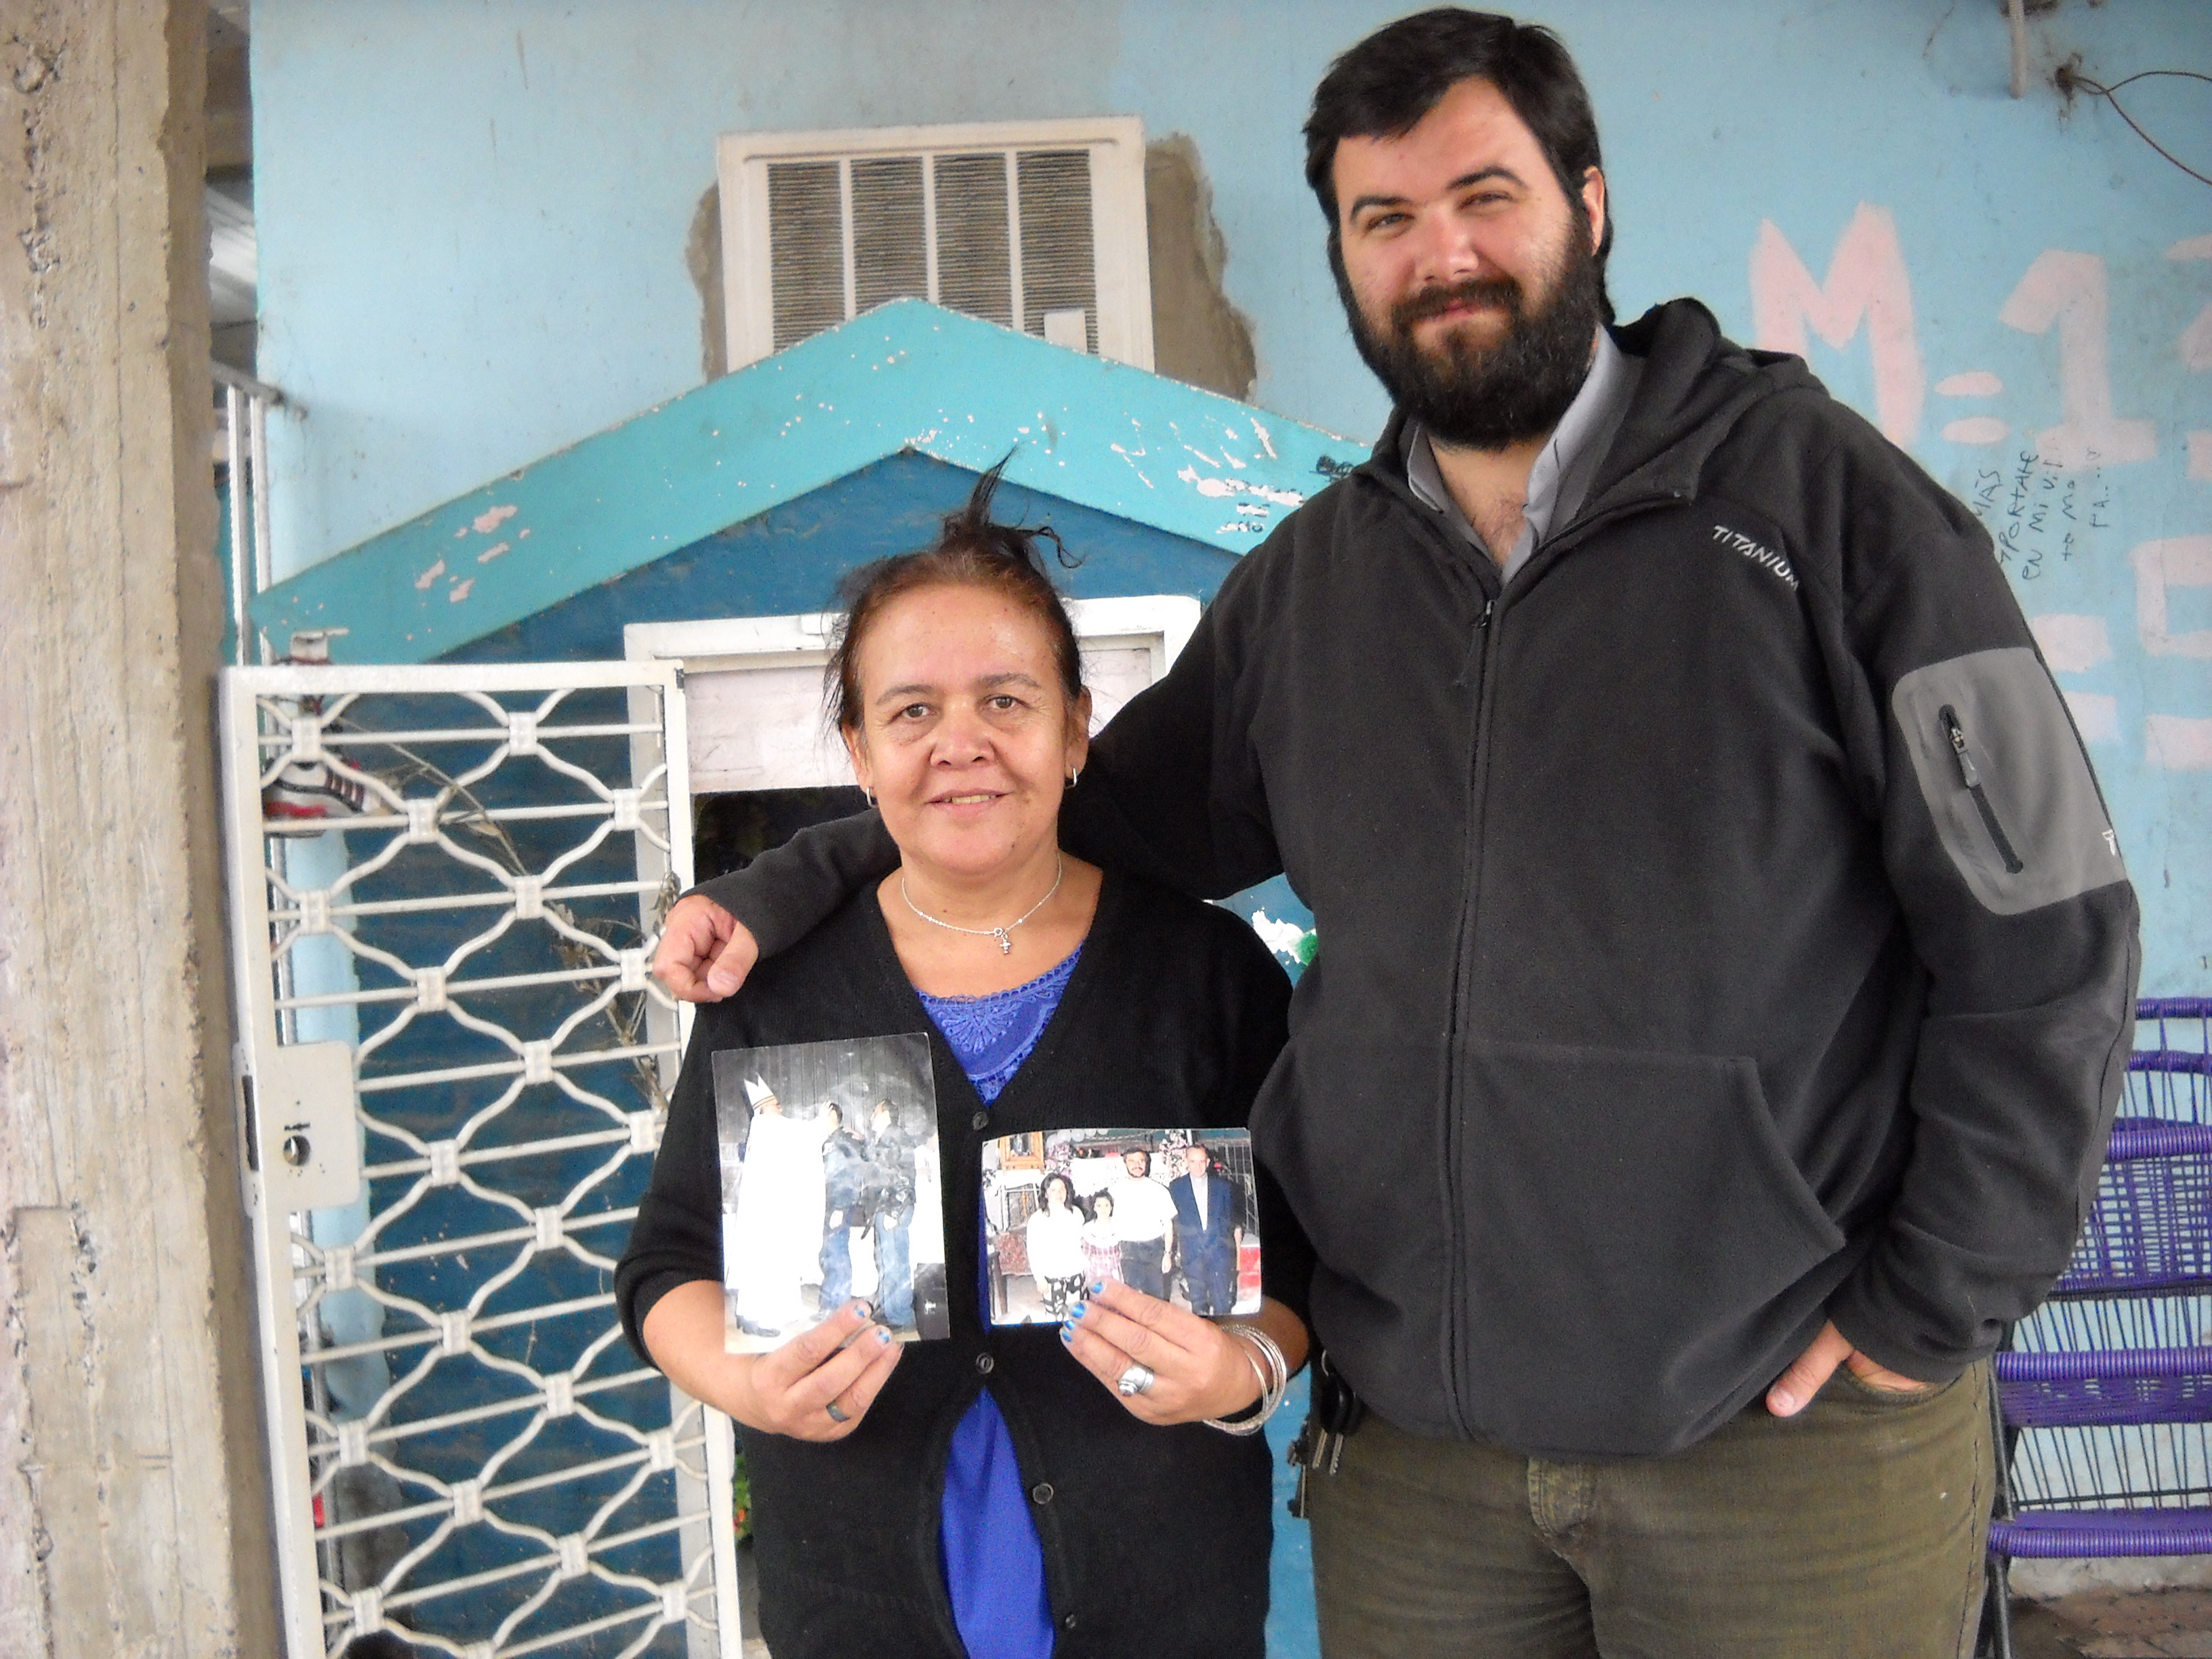 Fr. Juan Isasmendi and Melchora Lescano of the Villa 21 slum in Buenos Aires, showing her pictures with the future Pope Francis